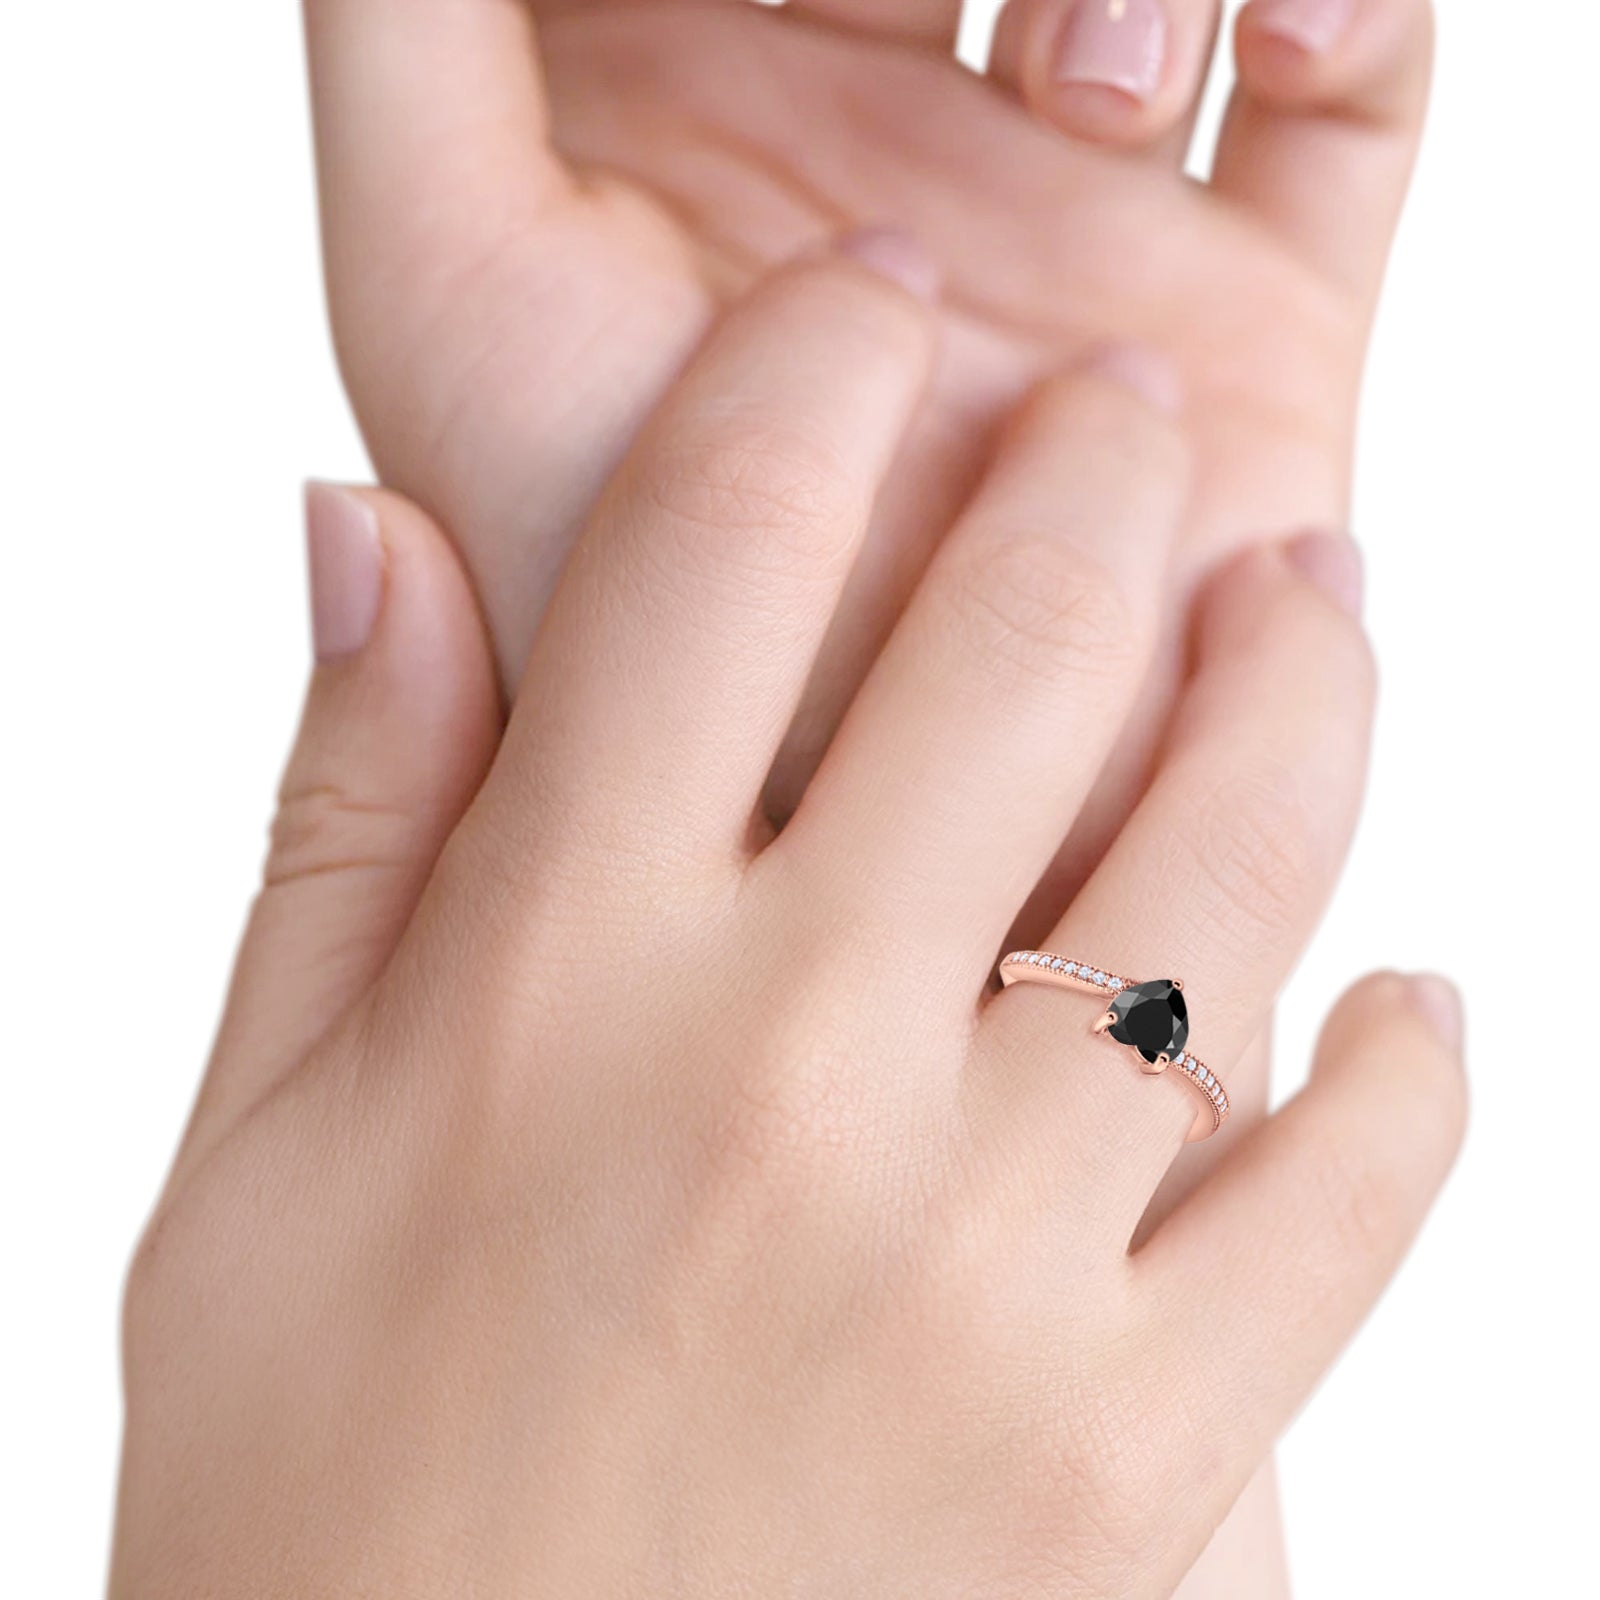 Heart Promise Ring Rose Tone, Simulated Black CZ 925 Sterling Silver